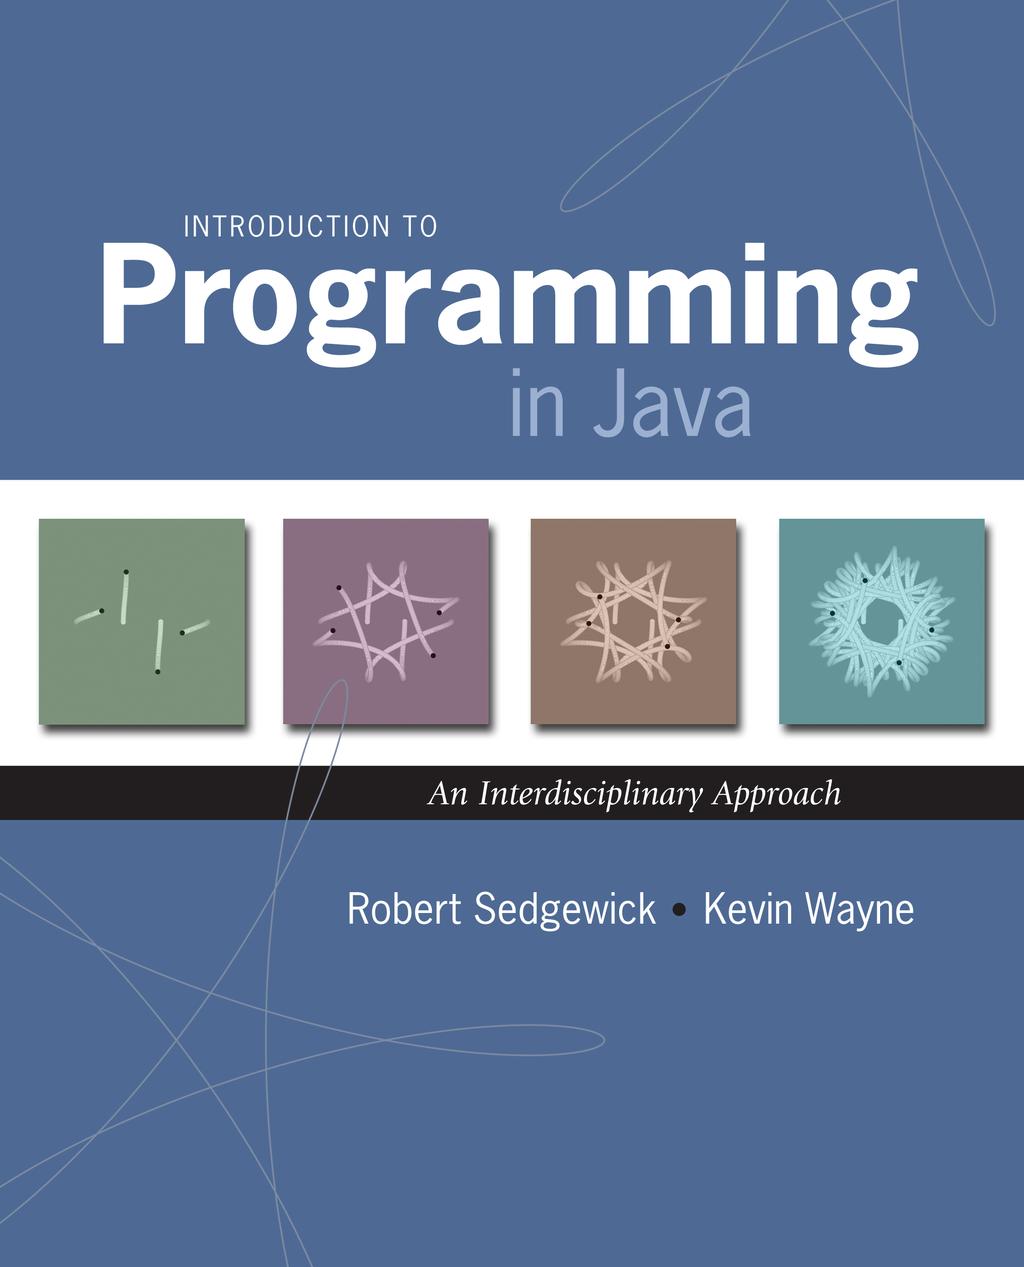 4.1 Performance Introduction to Programming in Java: An Interdisciplinary